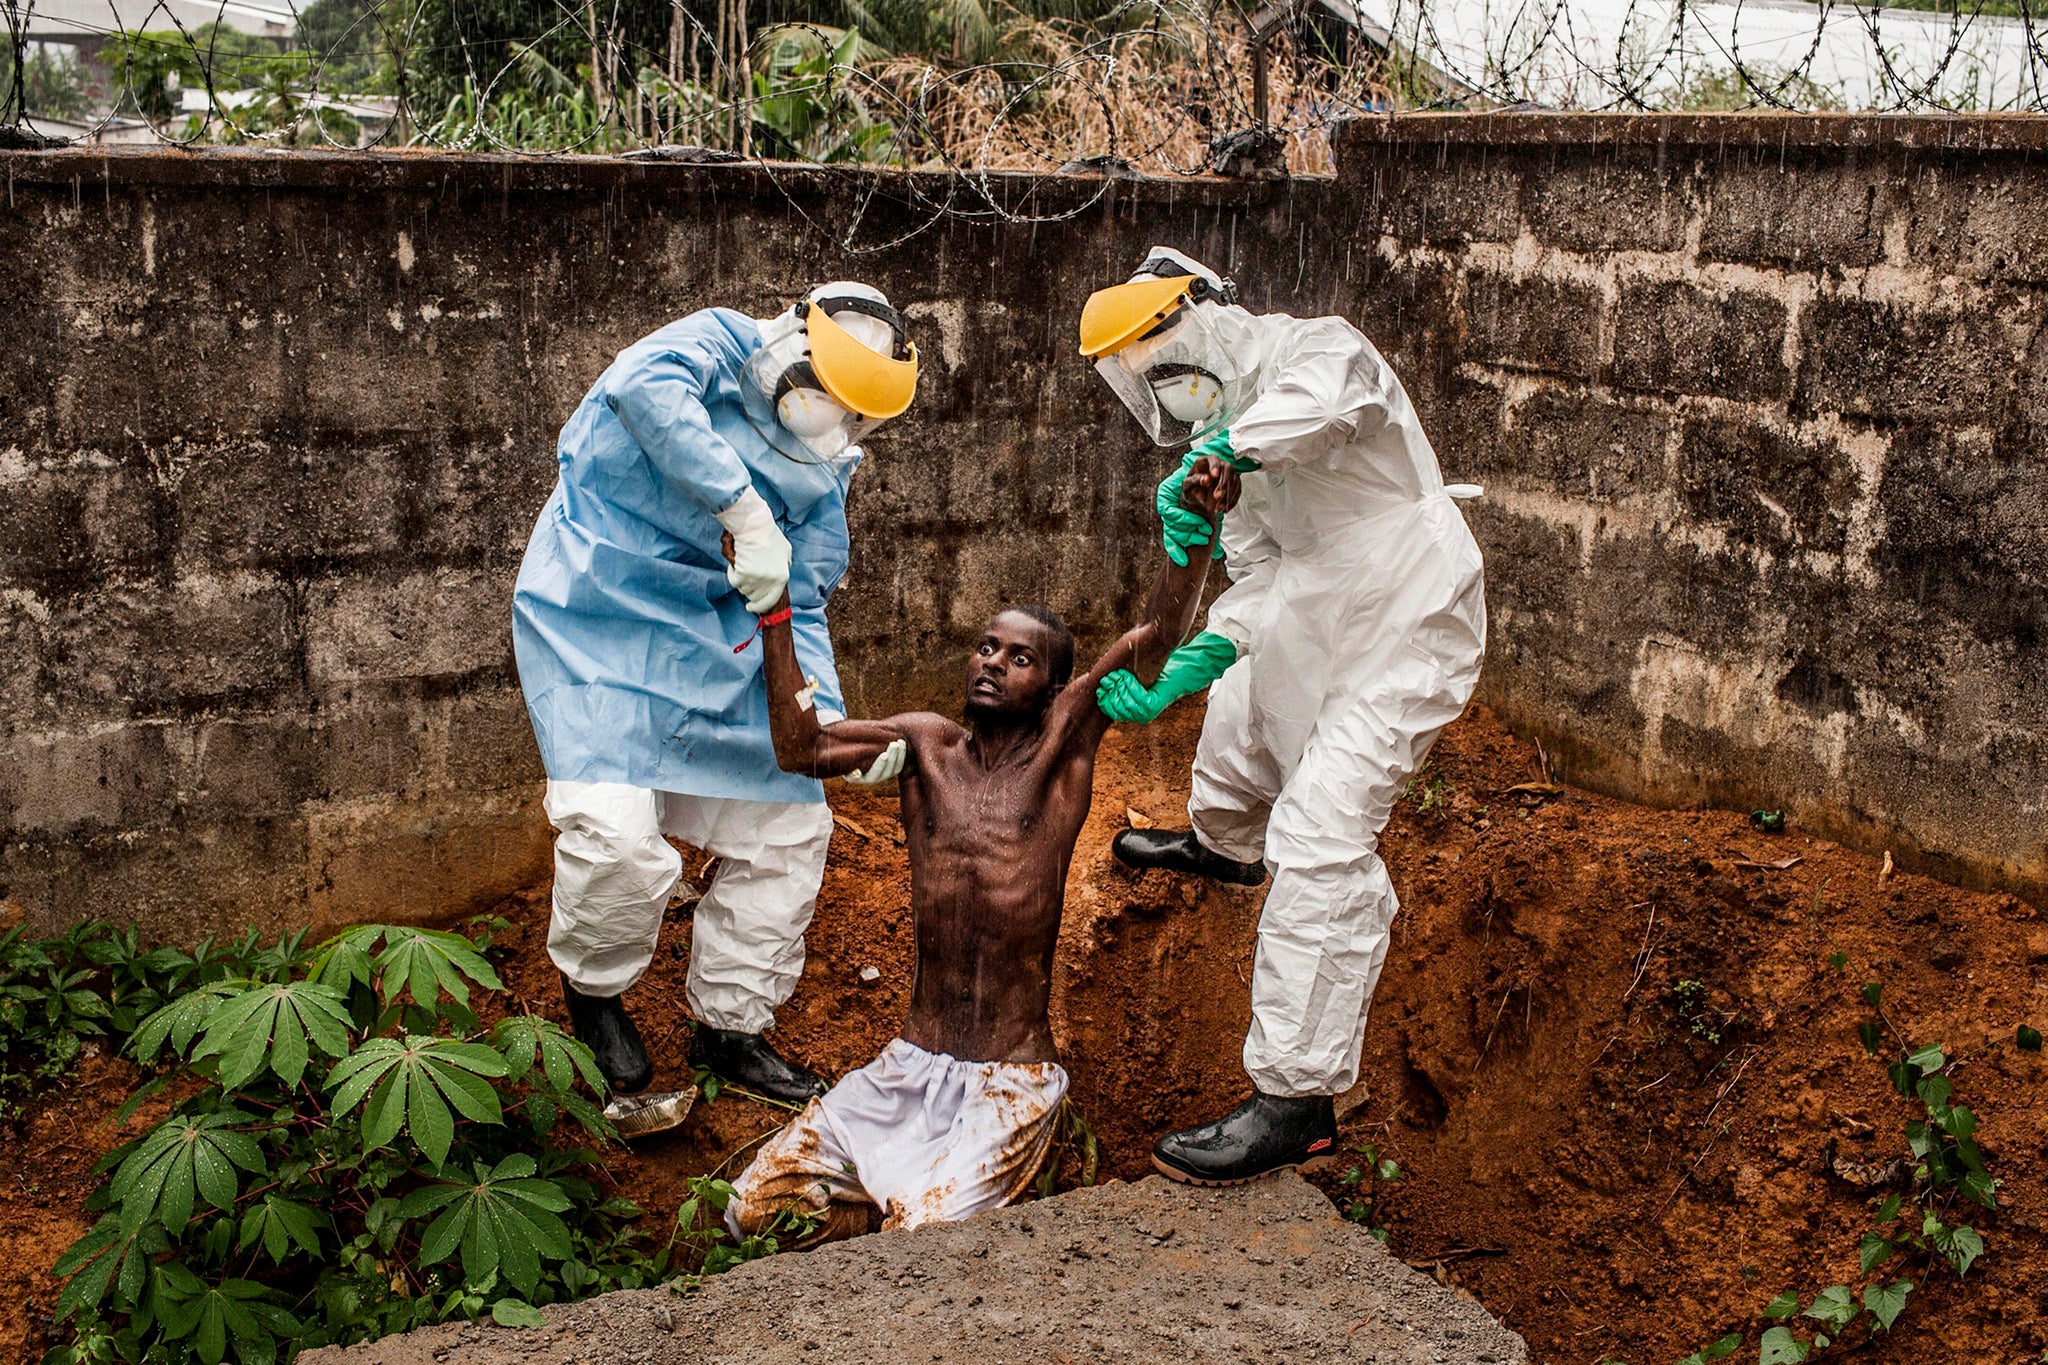 General News winner: Petter Muller's photograph of a delirious Ebola patient being lifted back to his isolation unit in Sierra Leone